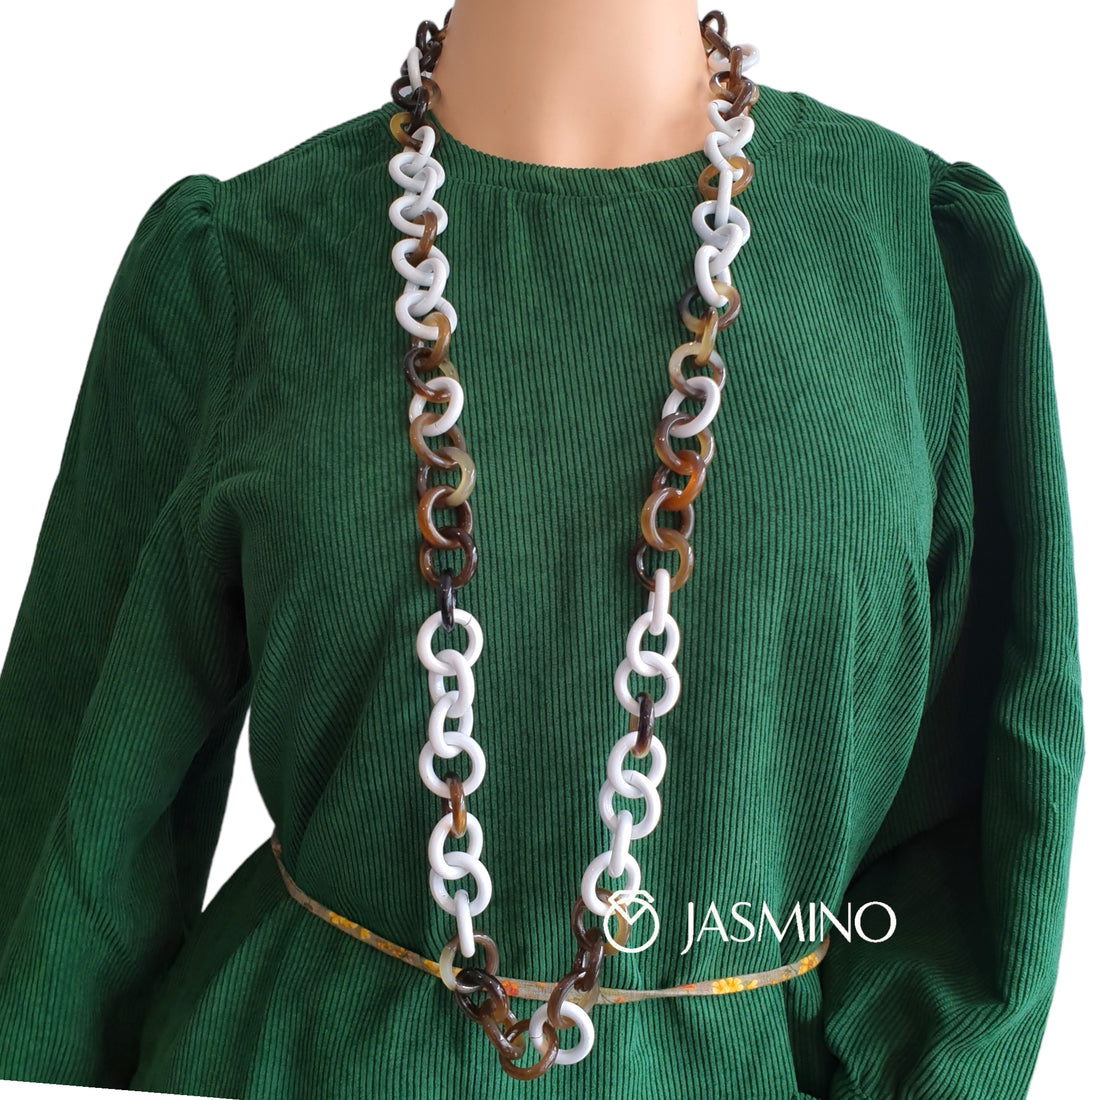 Unique Handmade Round Chain Link. Buffalo Horn Necklace J18461